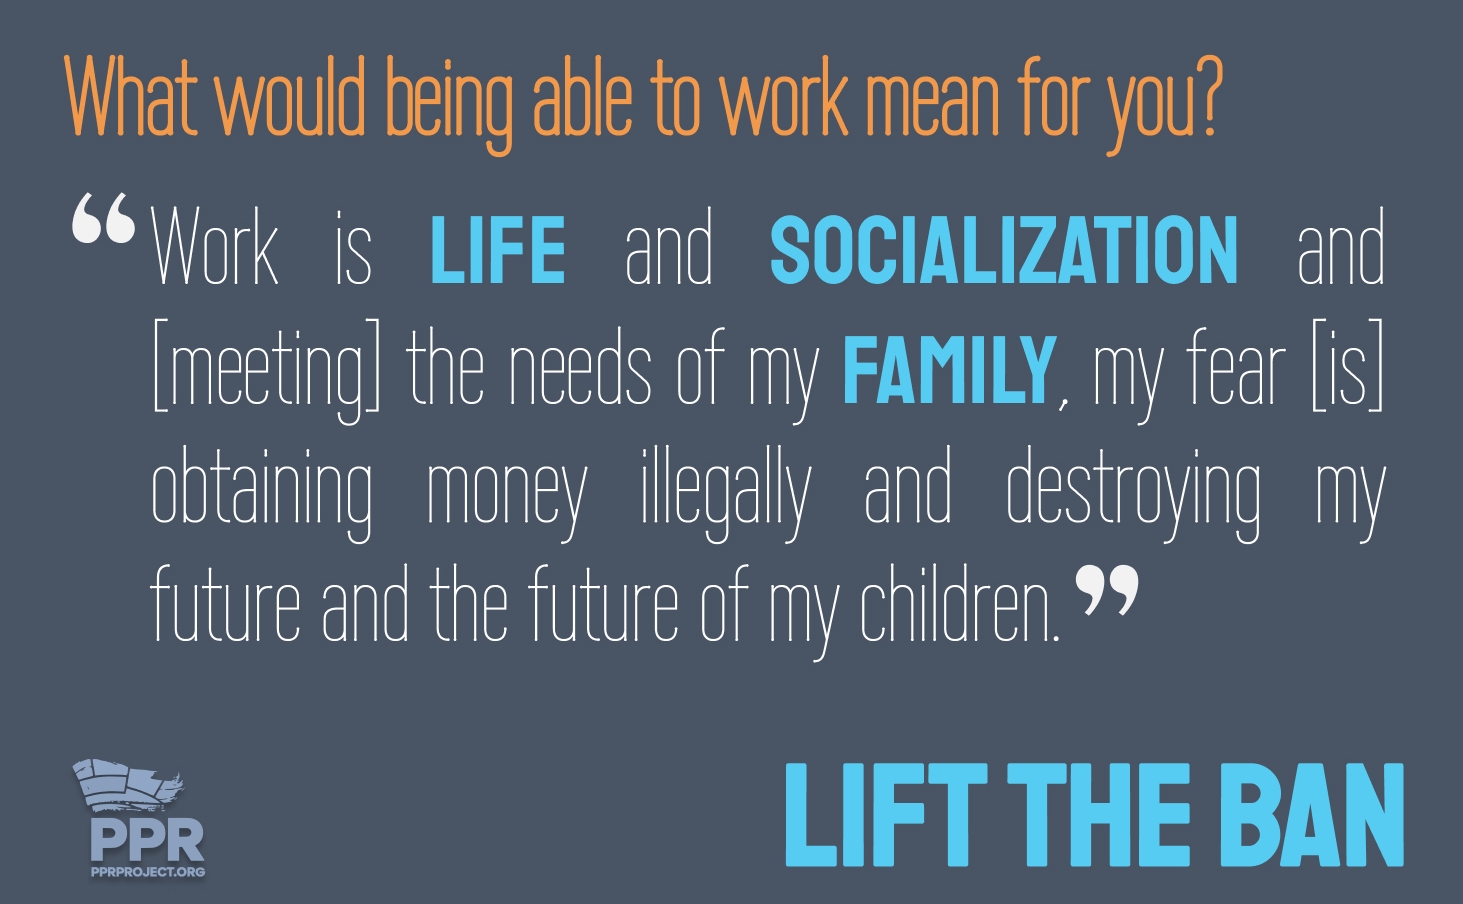 What would being able to work mean for you?   Work is life and socialization, and in order to secure the needs of my family, my fear [is] obtaining money illegally and destroying my future and the future of my children.